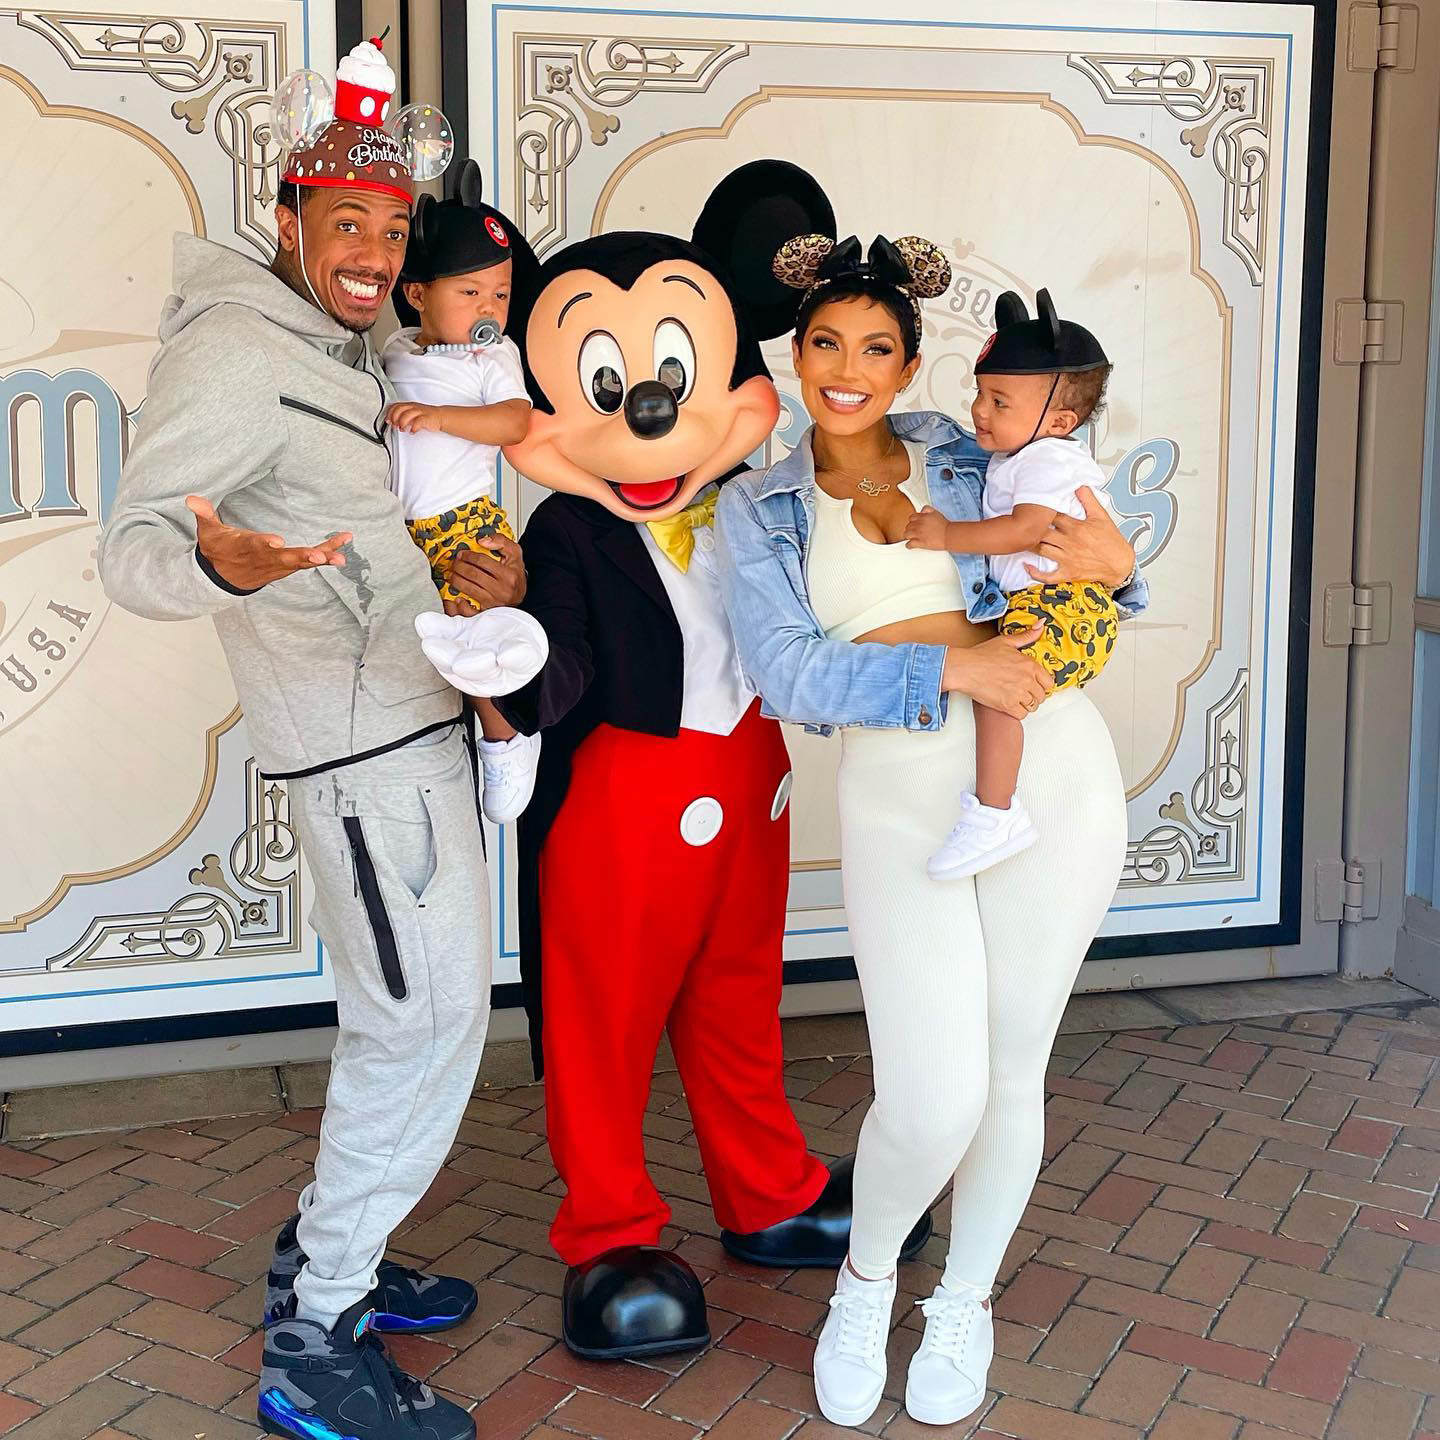 Nick Cannon and Abby De La Rosa’s Son Using Tablet to Communicate After Autism Diagnosis